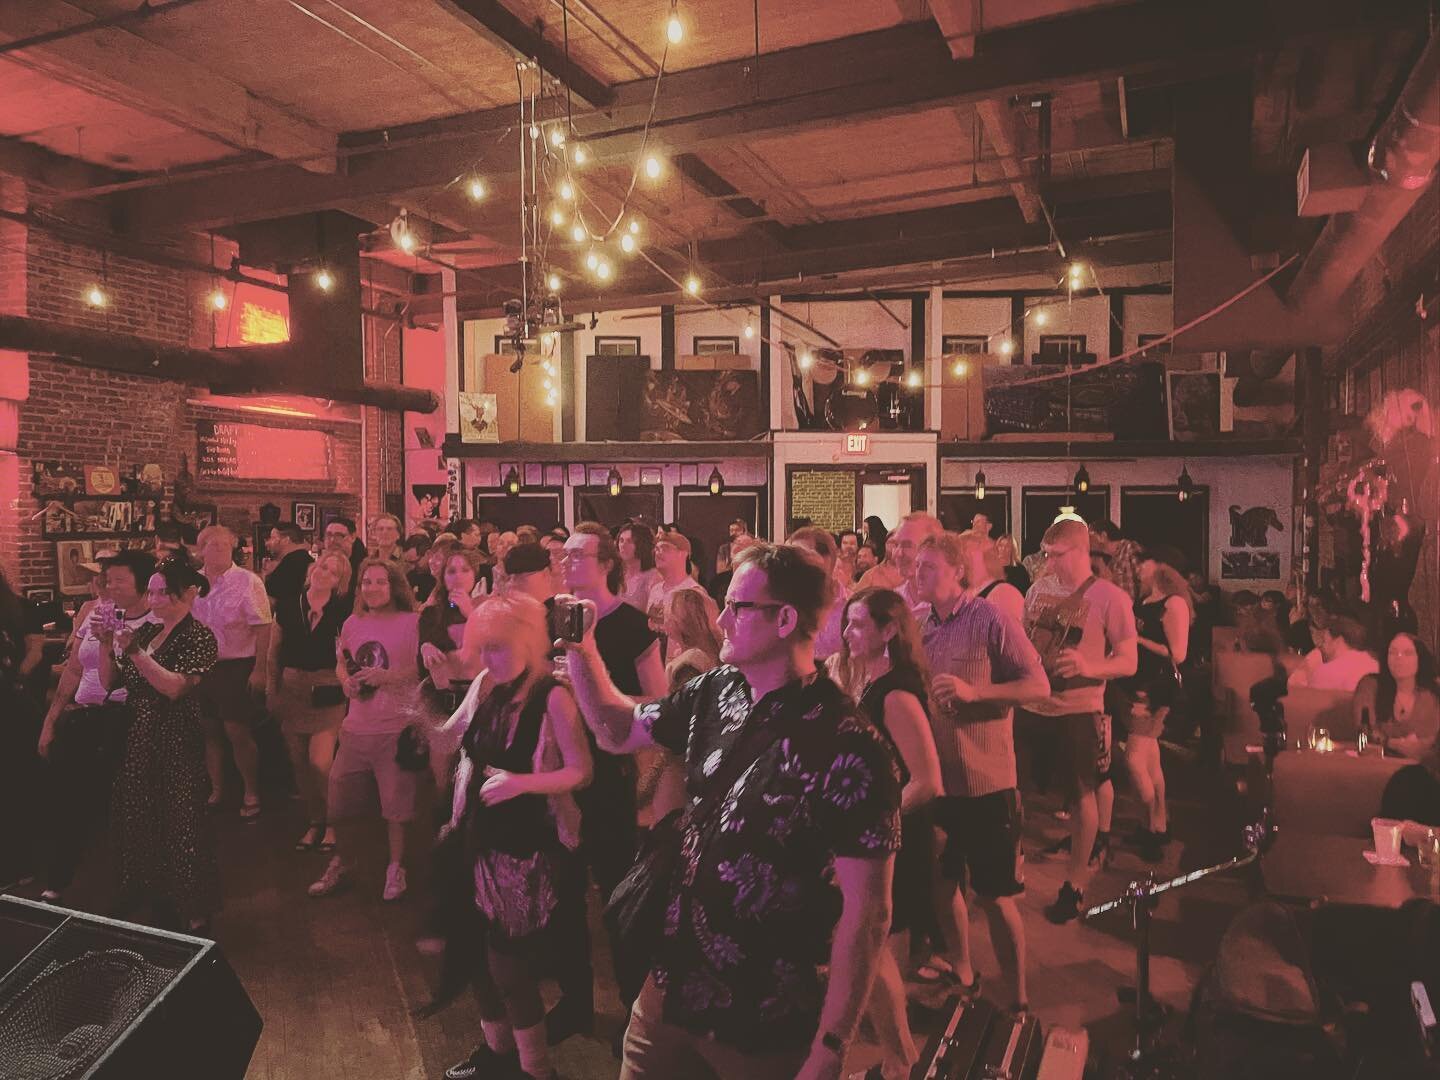 Thanks again to the attendees&hellip; and @handsomedevilzchicago for opening&hellip; it was a brilliant show&hellip; stay tuned for a special show announcement in the coming days&hellip; #thesmiths #morrissey #thecure @bsidememphis